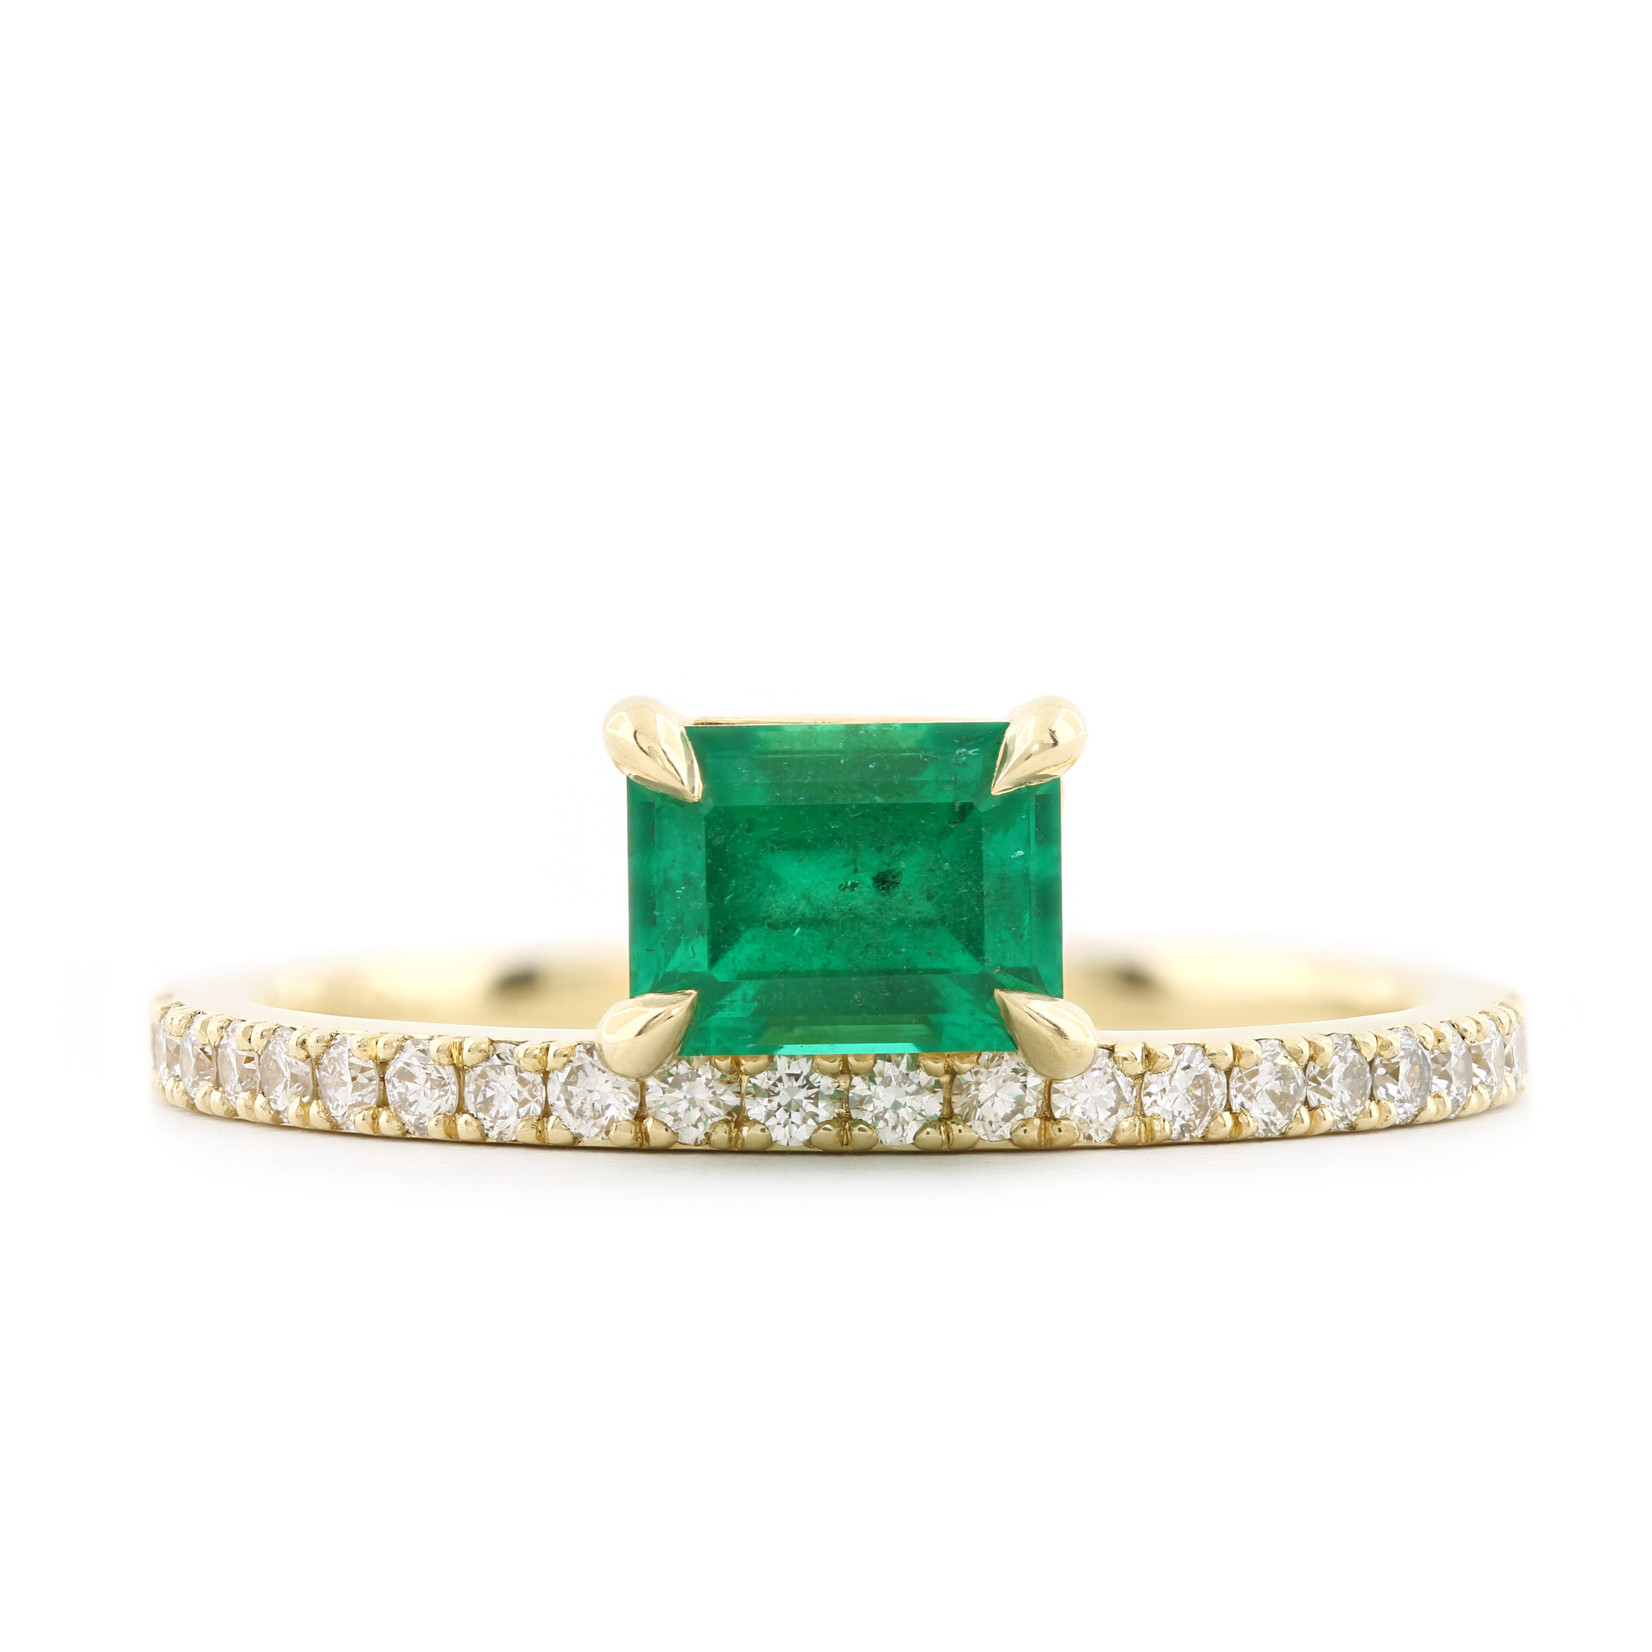 Baxter Moerman Cendra Ring with 0.84ct Emerald